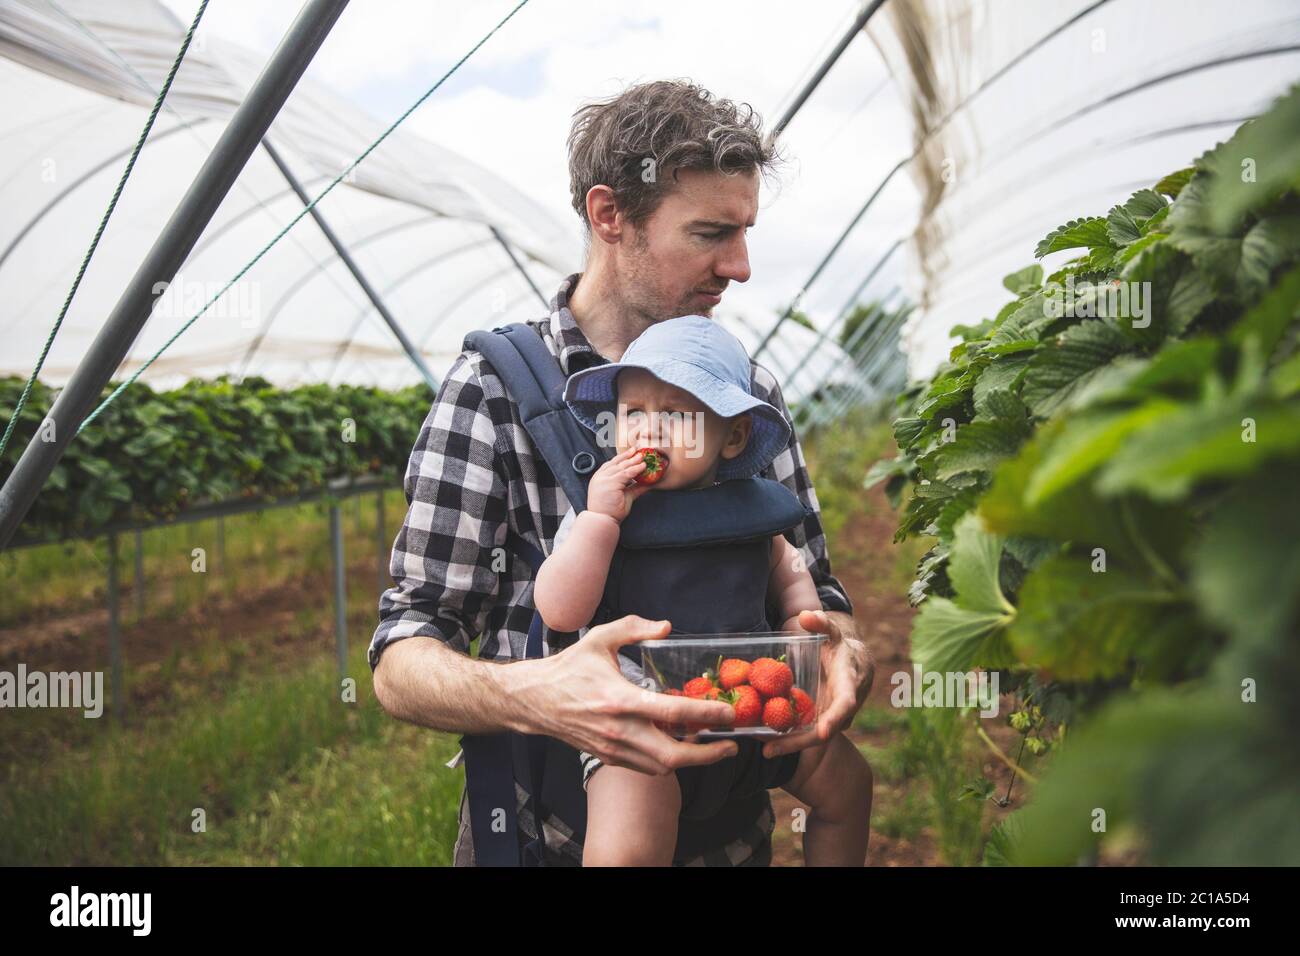 A father and son enjoy picking fresh strawberries together. Family lifestyle. Stock Photo